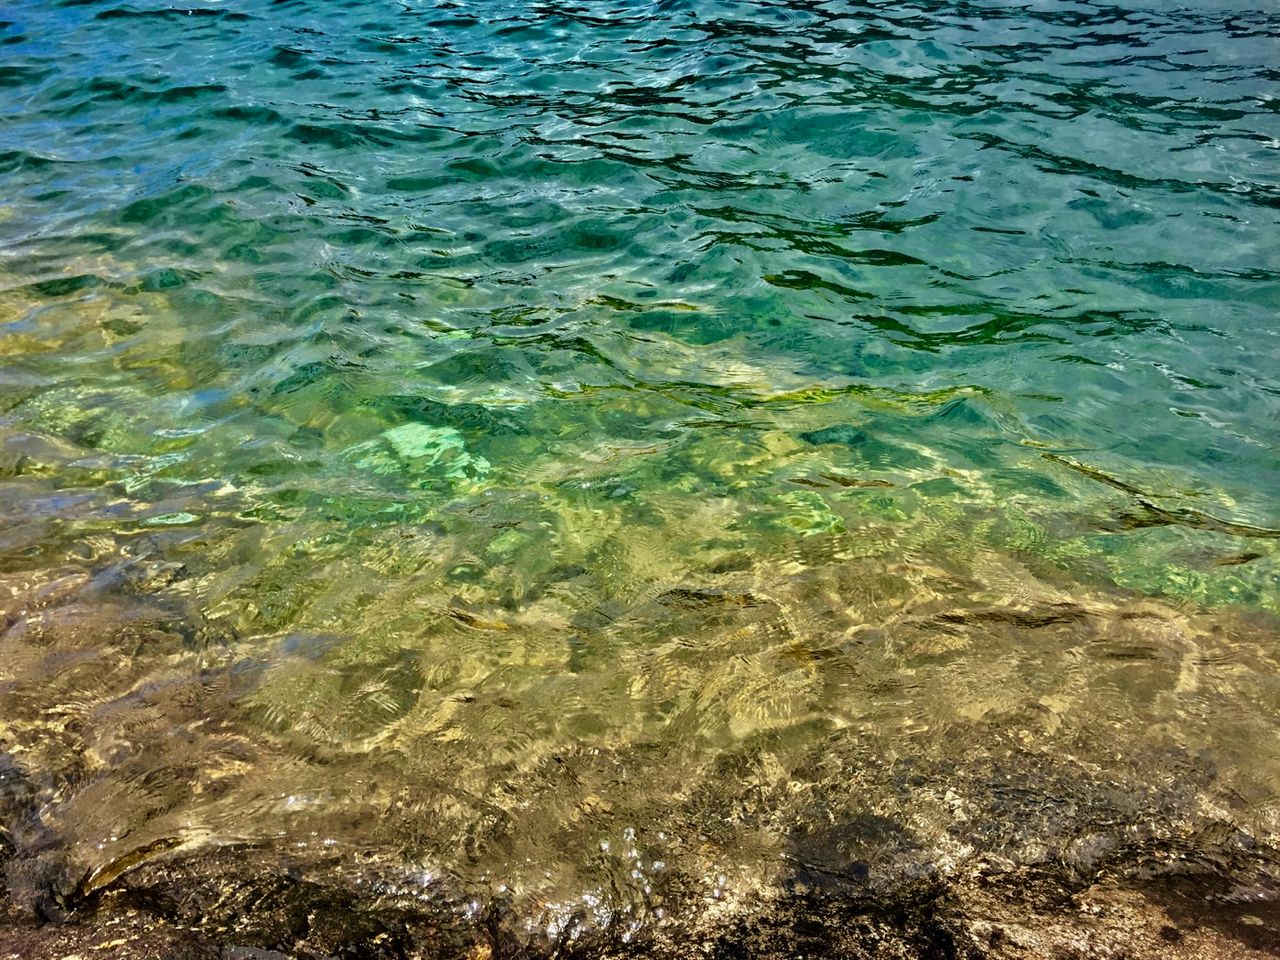 Clear water with lake bottom visible beneath.